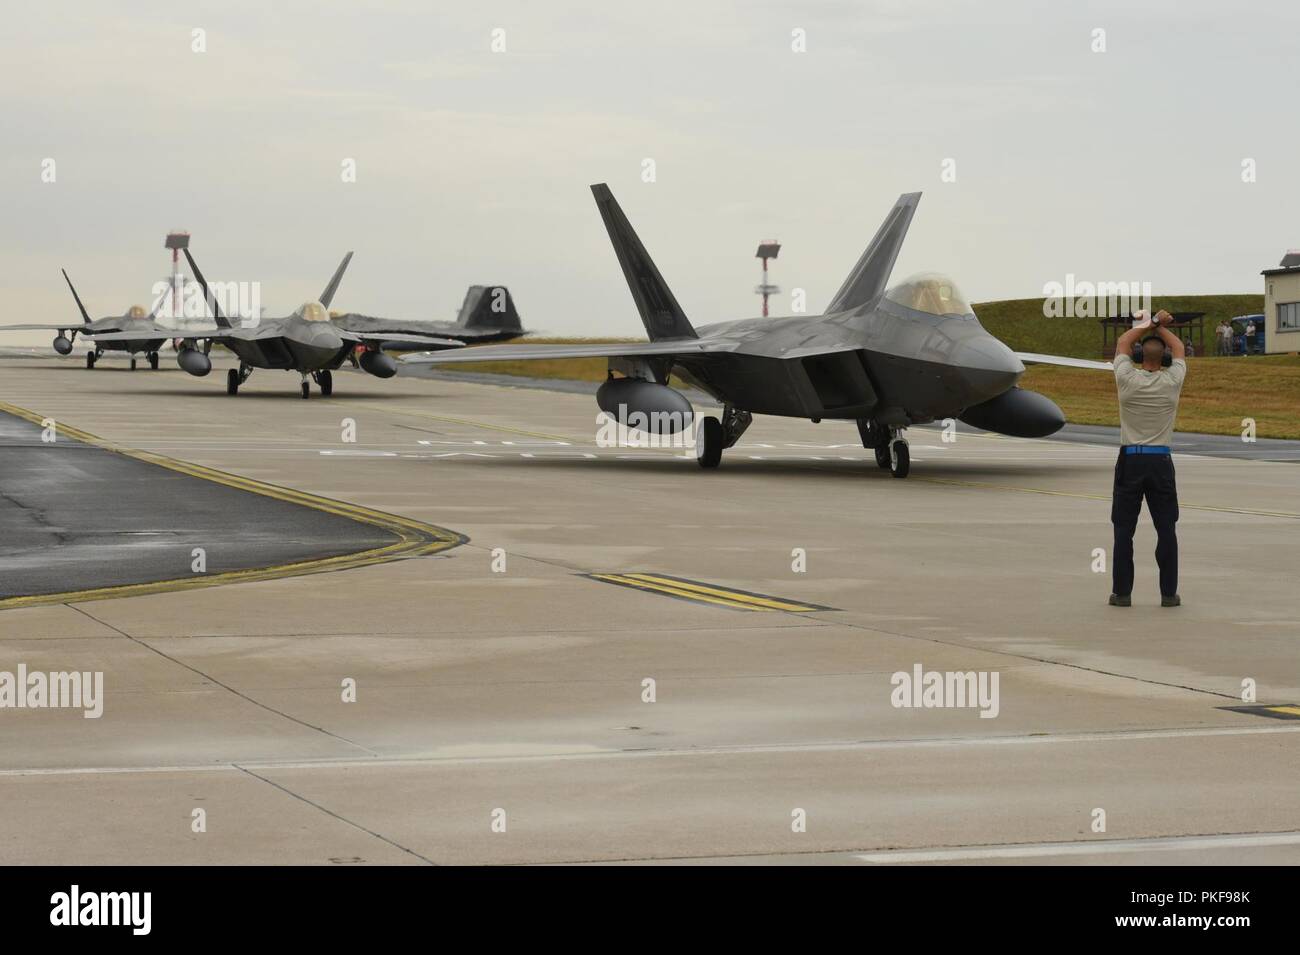 U.S. Air Force F-22 Raptors from the 95th Fighter Squadron, 325th Fighter Wing at Tyndall Air Base, Fla., arrive at Spangdahlem Air Base, Germany, Aug. 8, 2018. The 95th FS is deployed to Europe for several weeks to conduct training with other European-based aircraft as part of a Flying Training Deployment. Forward locations enable collective defense capabilities and provide U.S. and NATO the strategic and operational breadth needed to deter adversaries and assure our allies and partners. Stock Photo